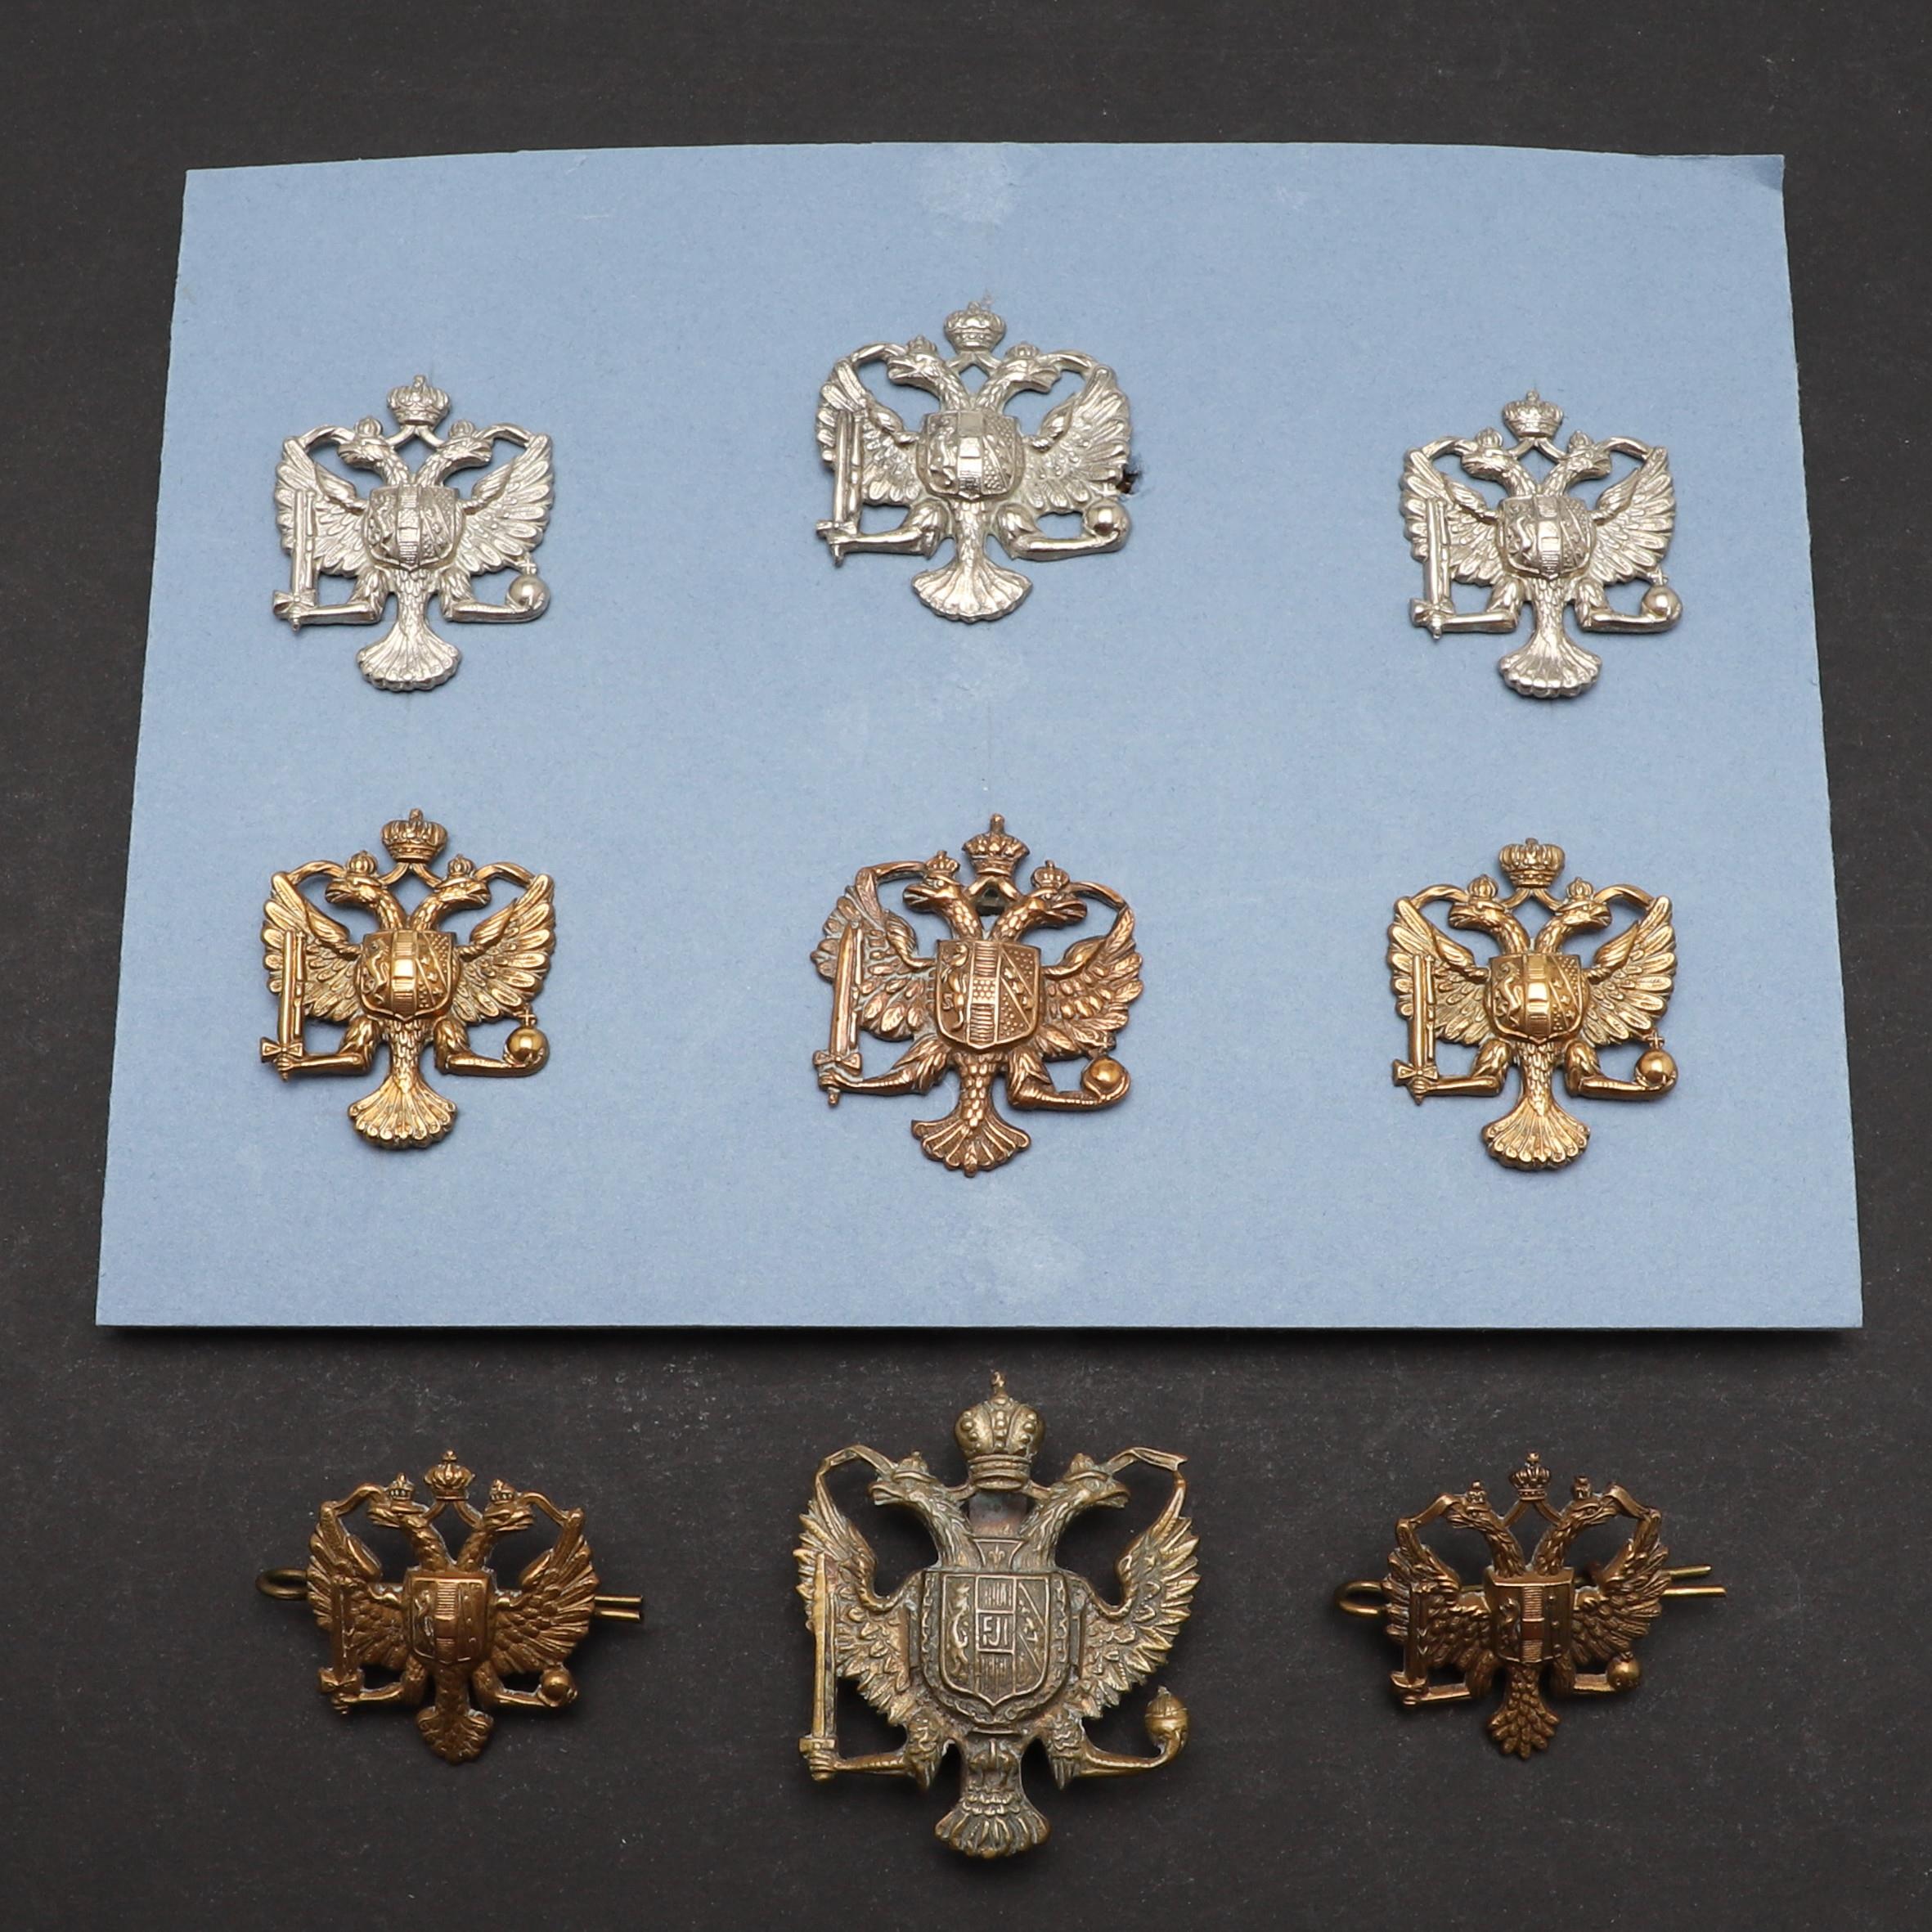 AN INTERESTING COLLECTION OF 1ST KING'S DRAGOON GUARDS CAP AND COLLAR BADGES.